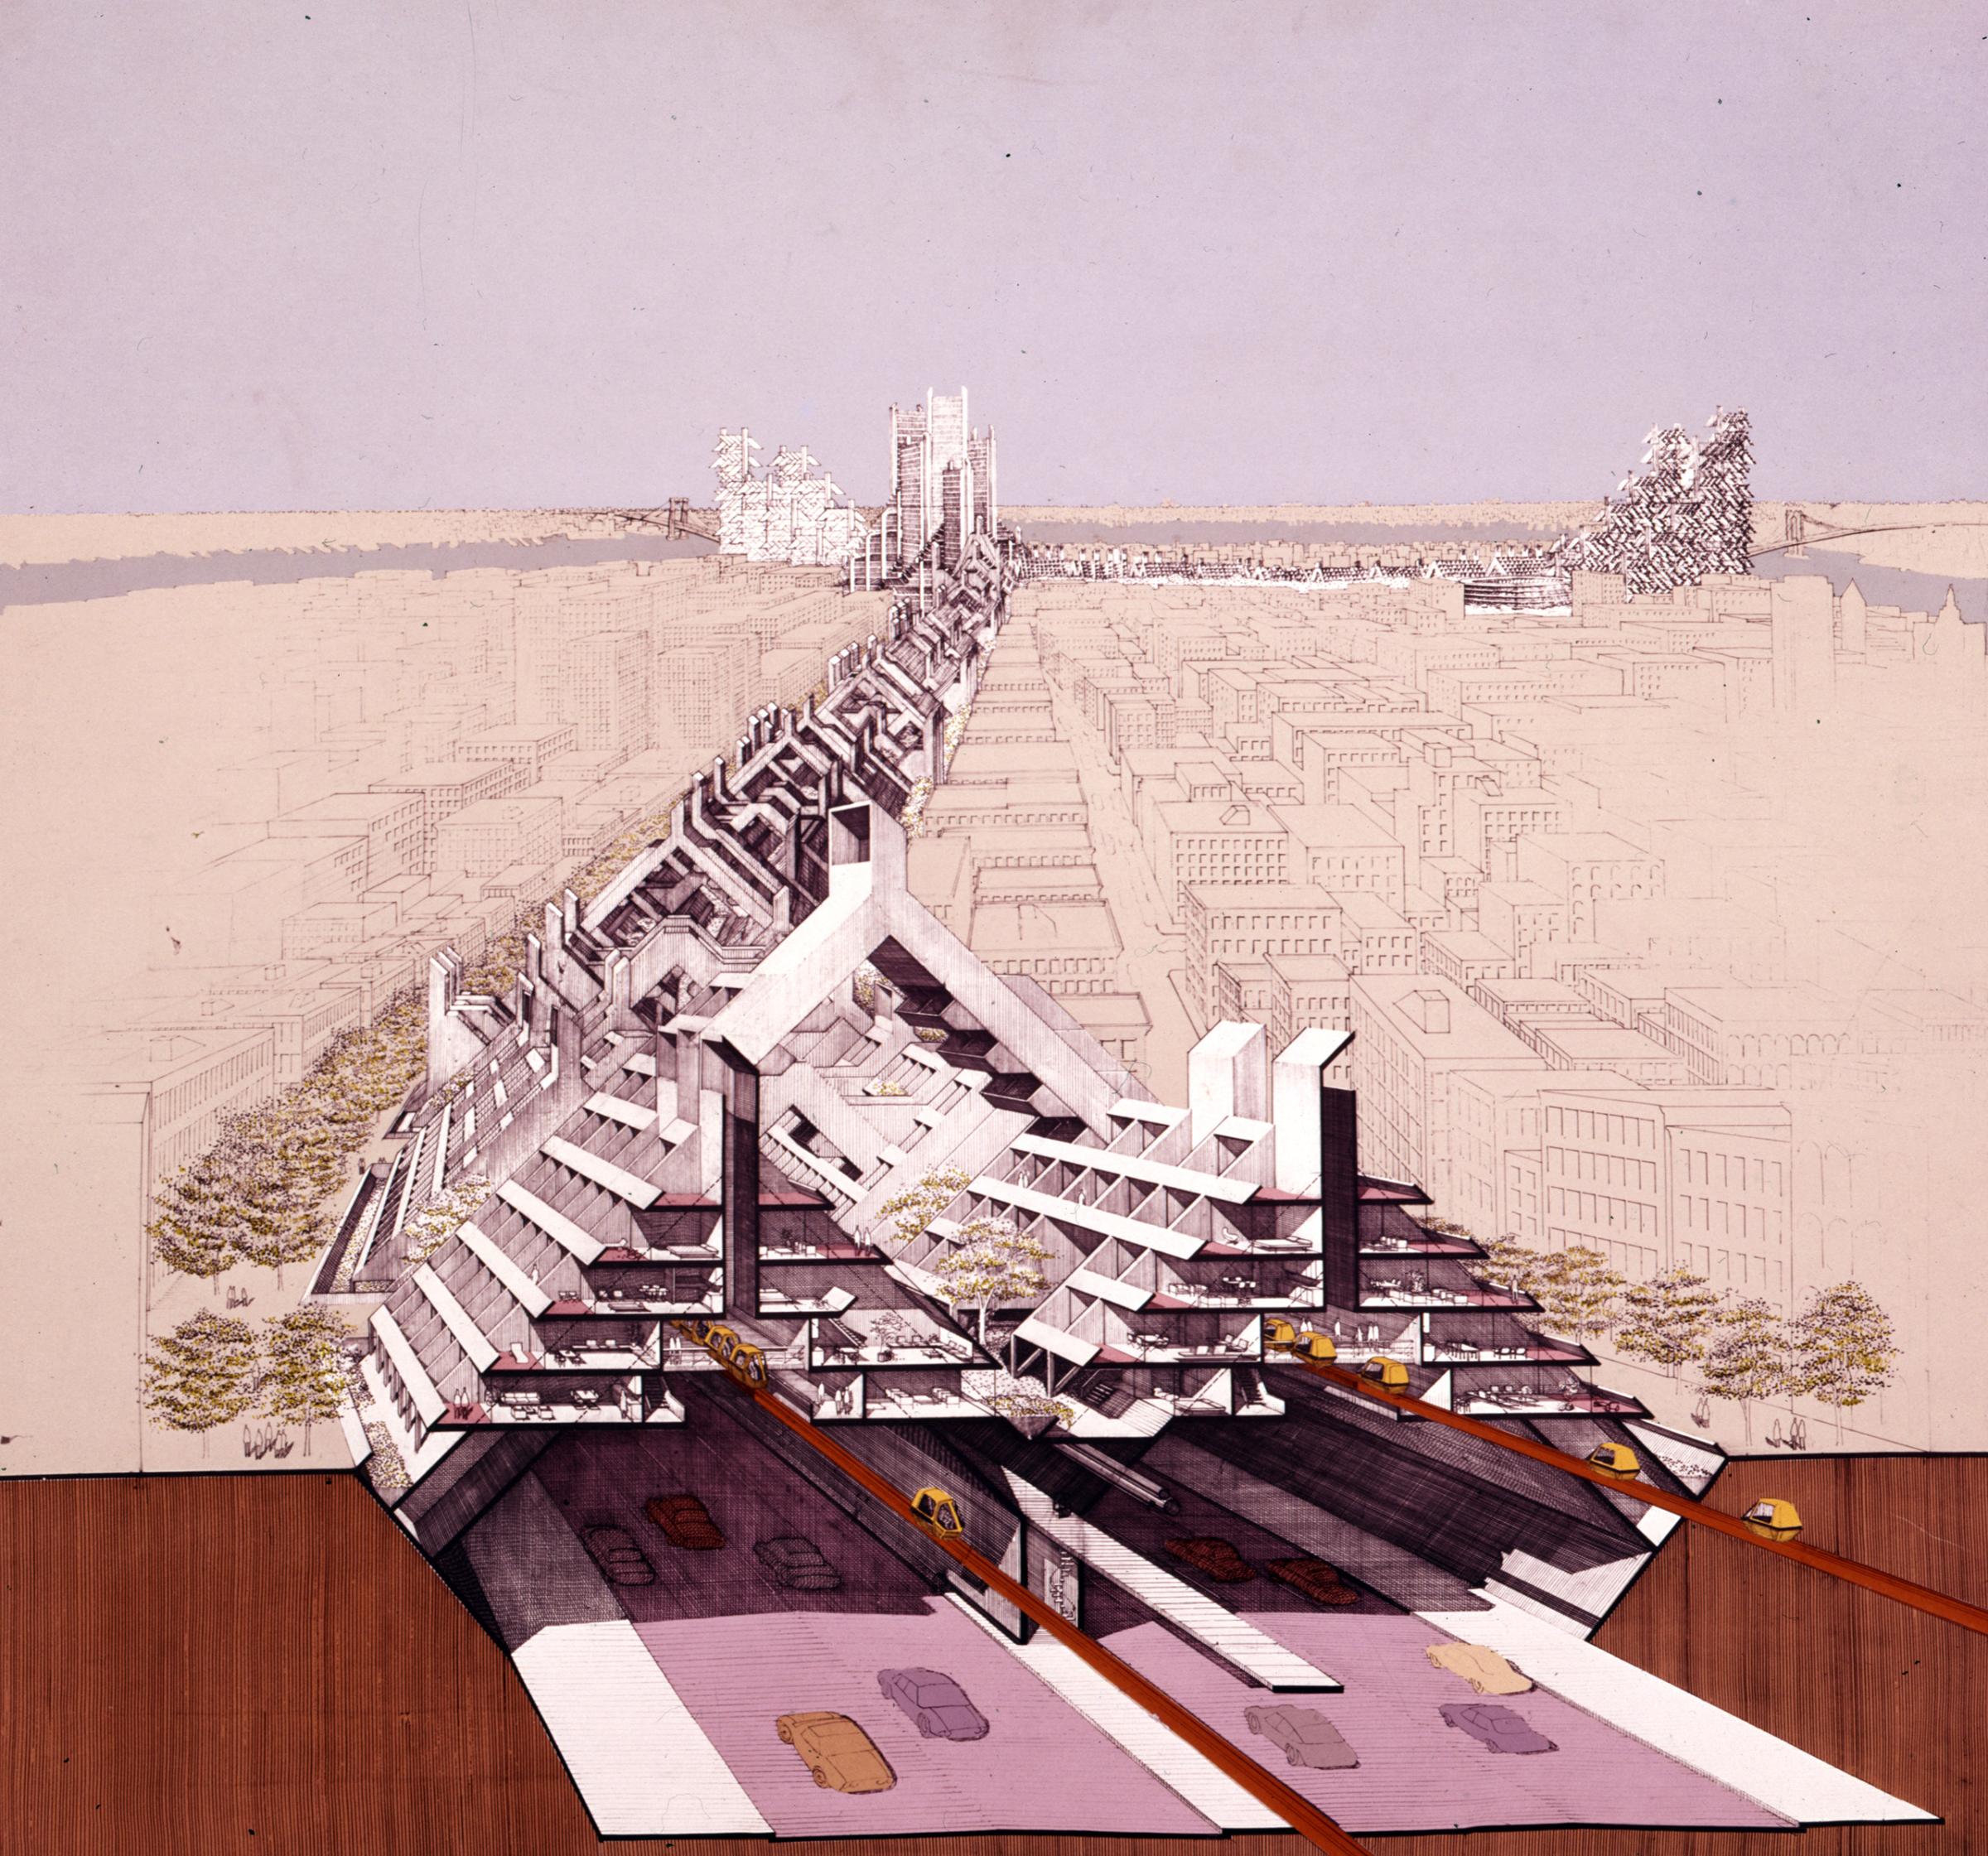 Concept renderings of Robert Moses' proposed LOMEX (Lower Manhattan Expressway).